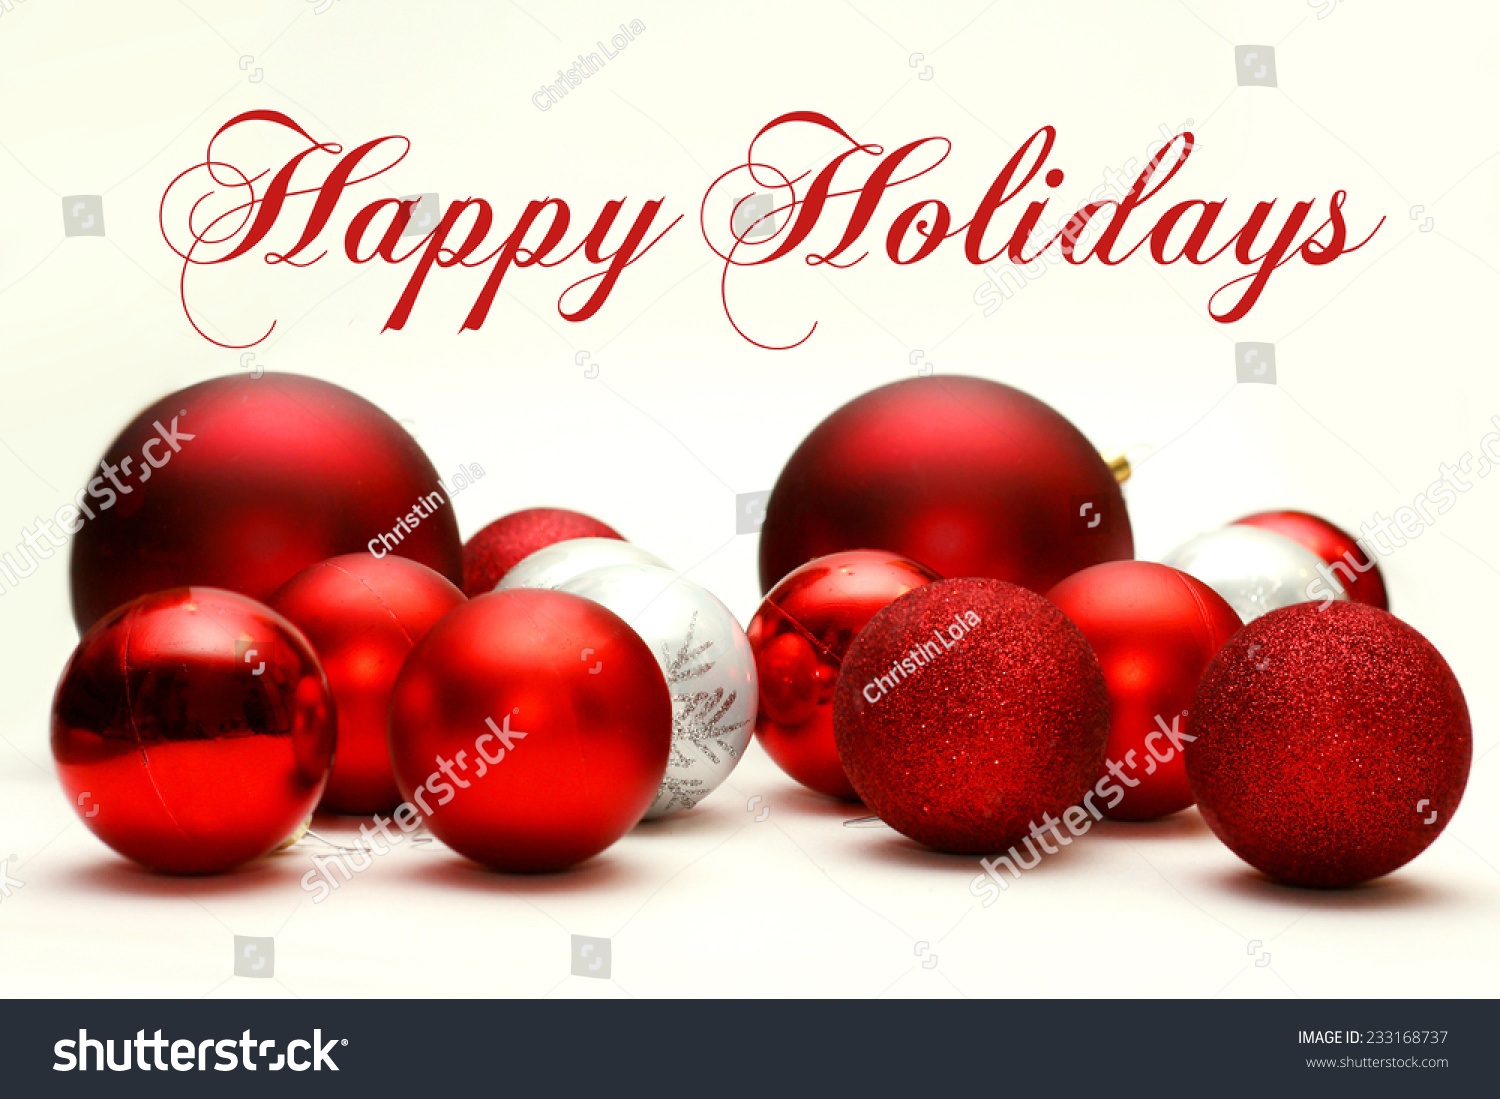 A Collection White and Red Sparkling Christmas Bulb Ornaments are Scattered on a White Background, with the text Happy Holidays. #233168737